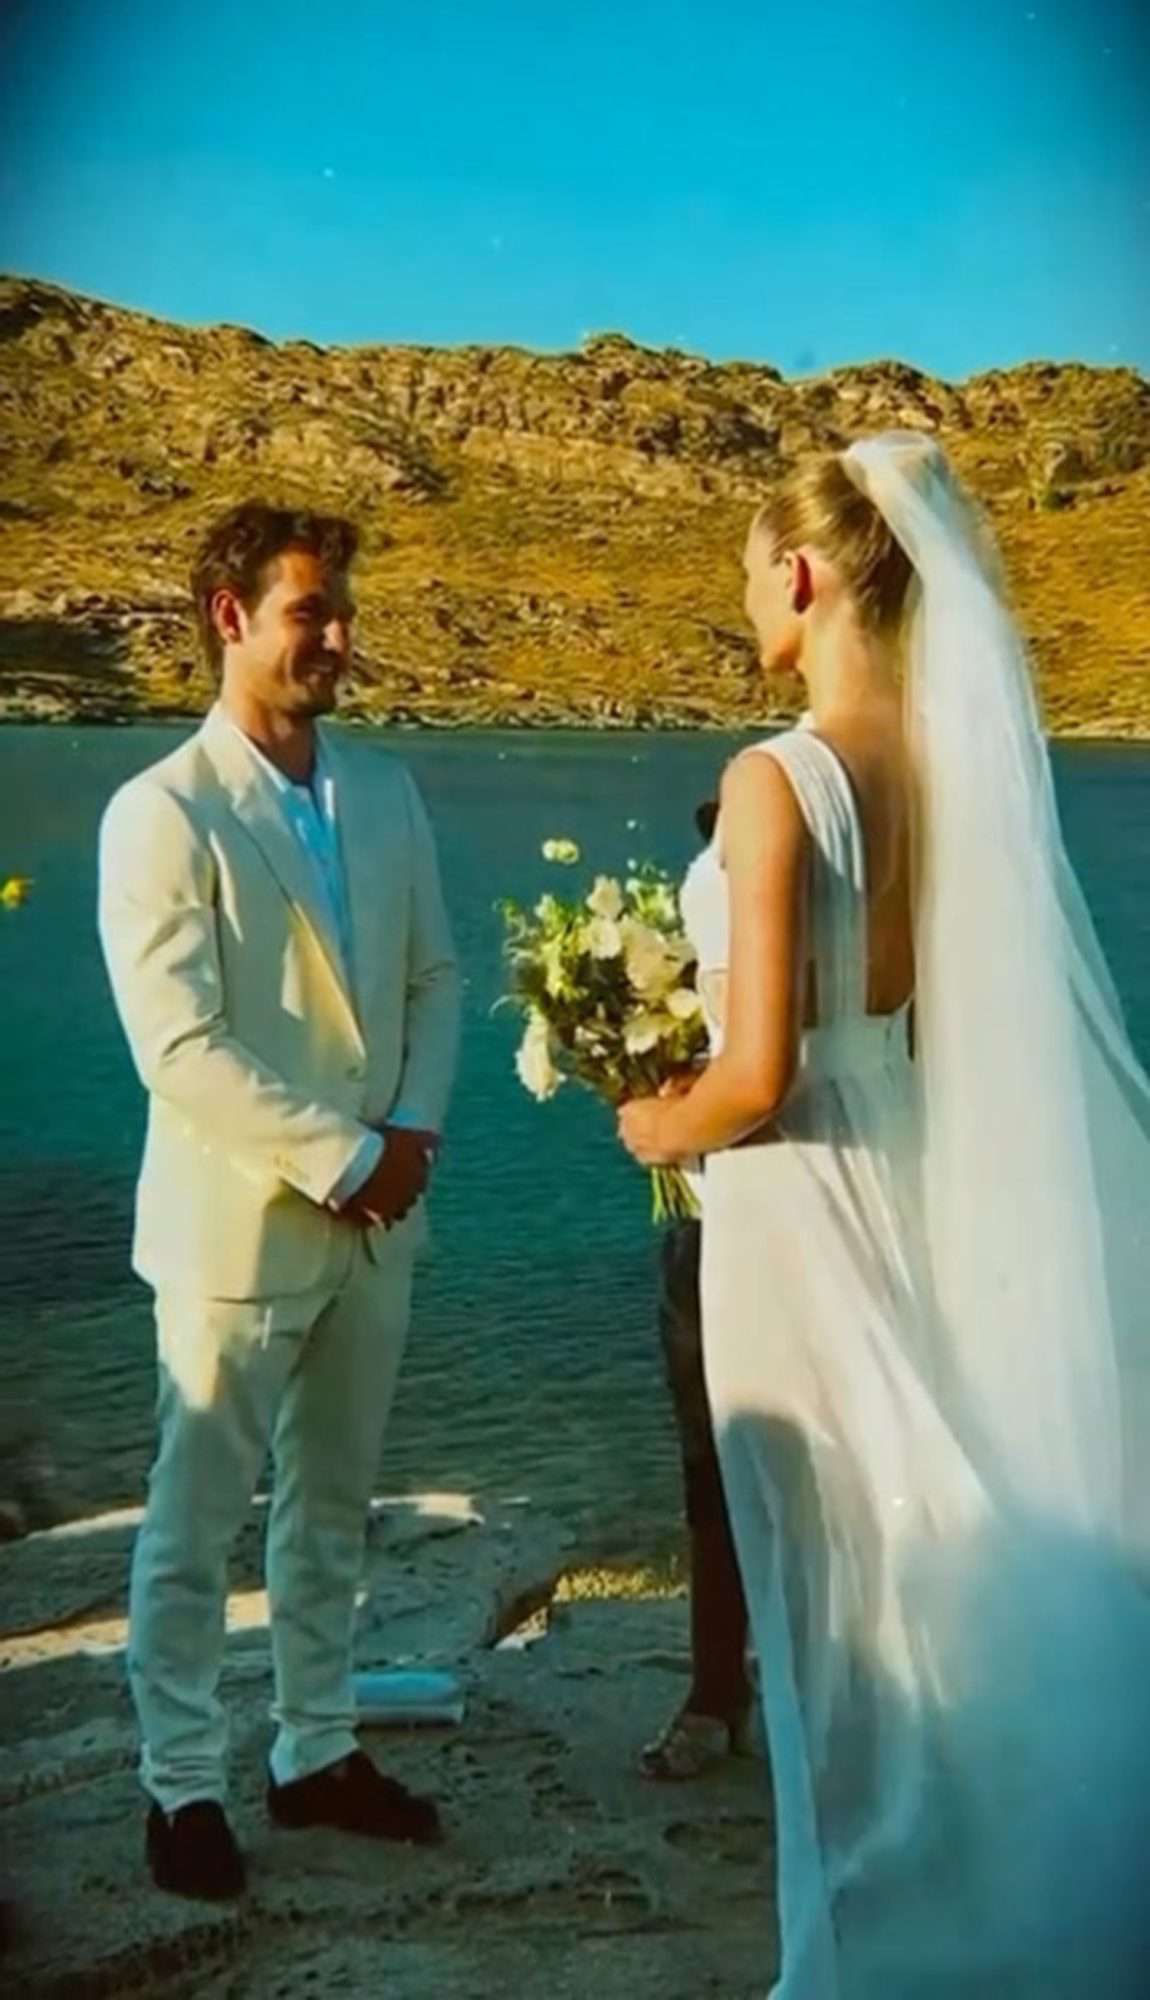 Toni Garrn and Alex Pettyfer Get Married (Again!) in Greece: ‘The Most Beautiful Dream’